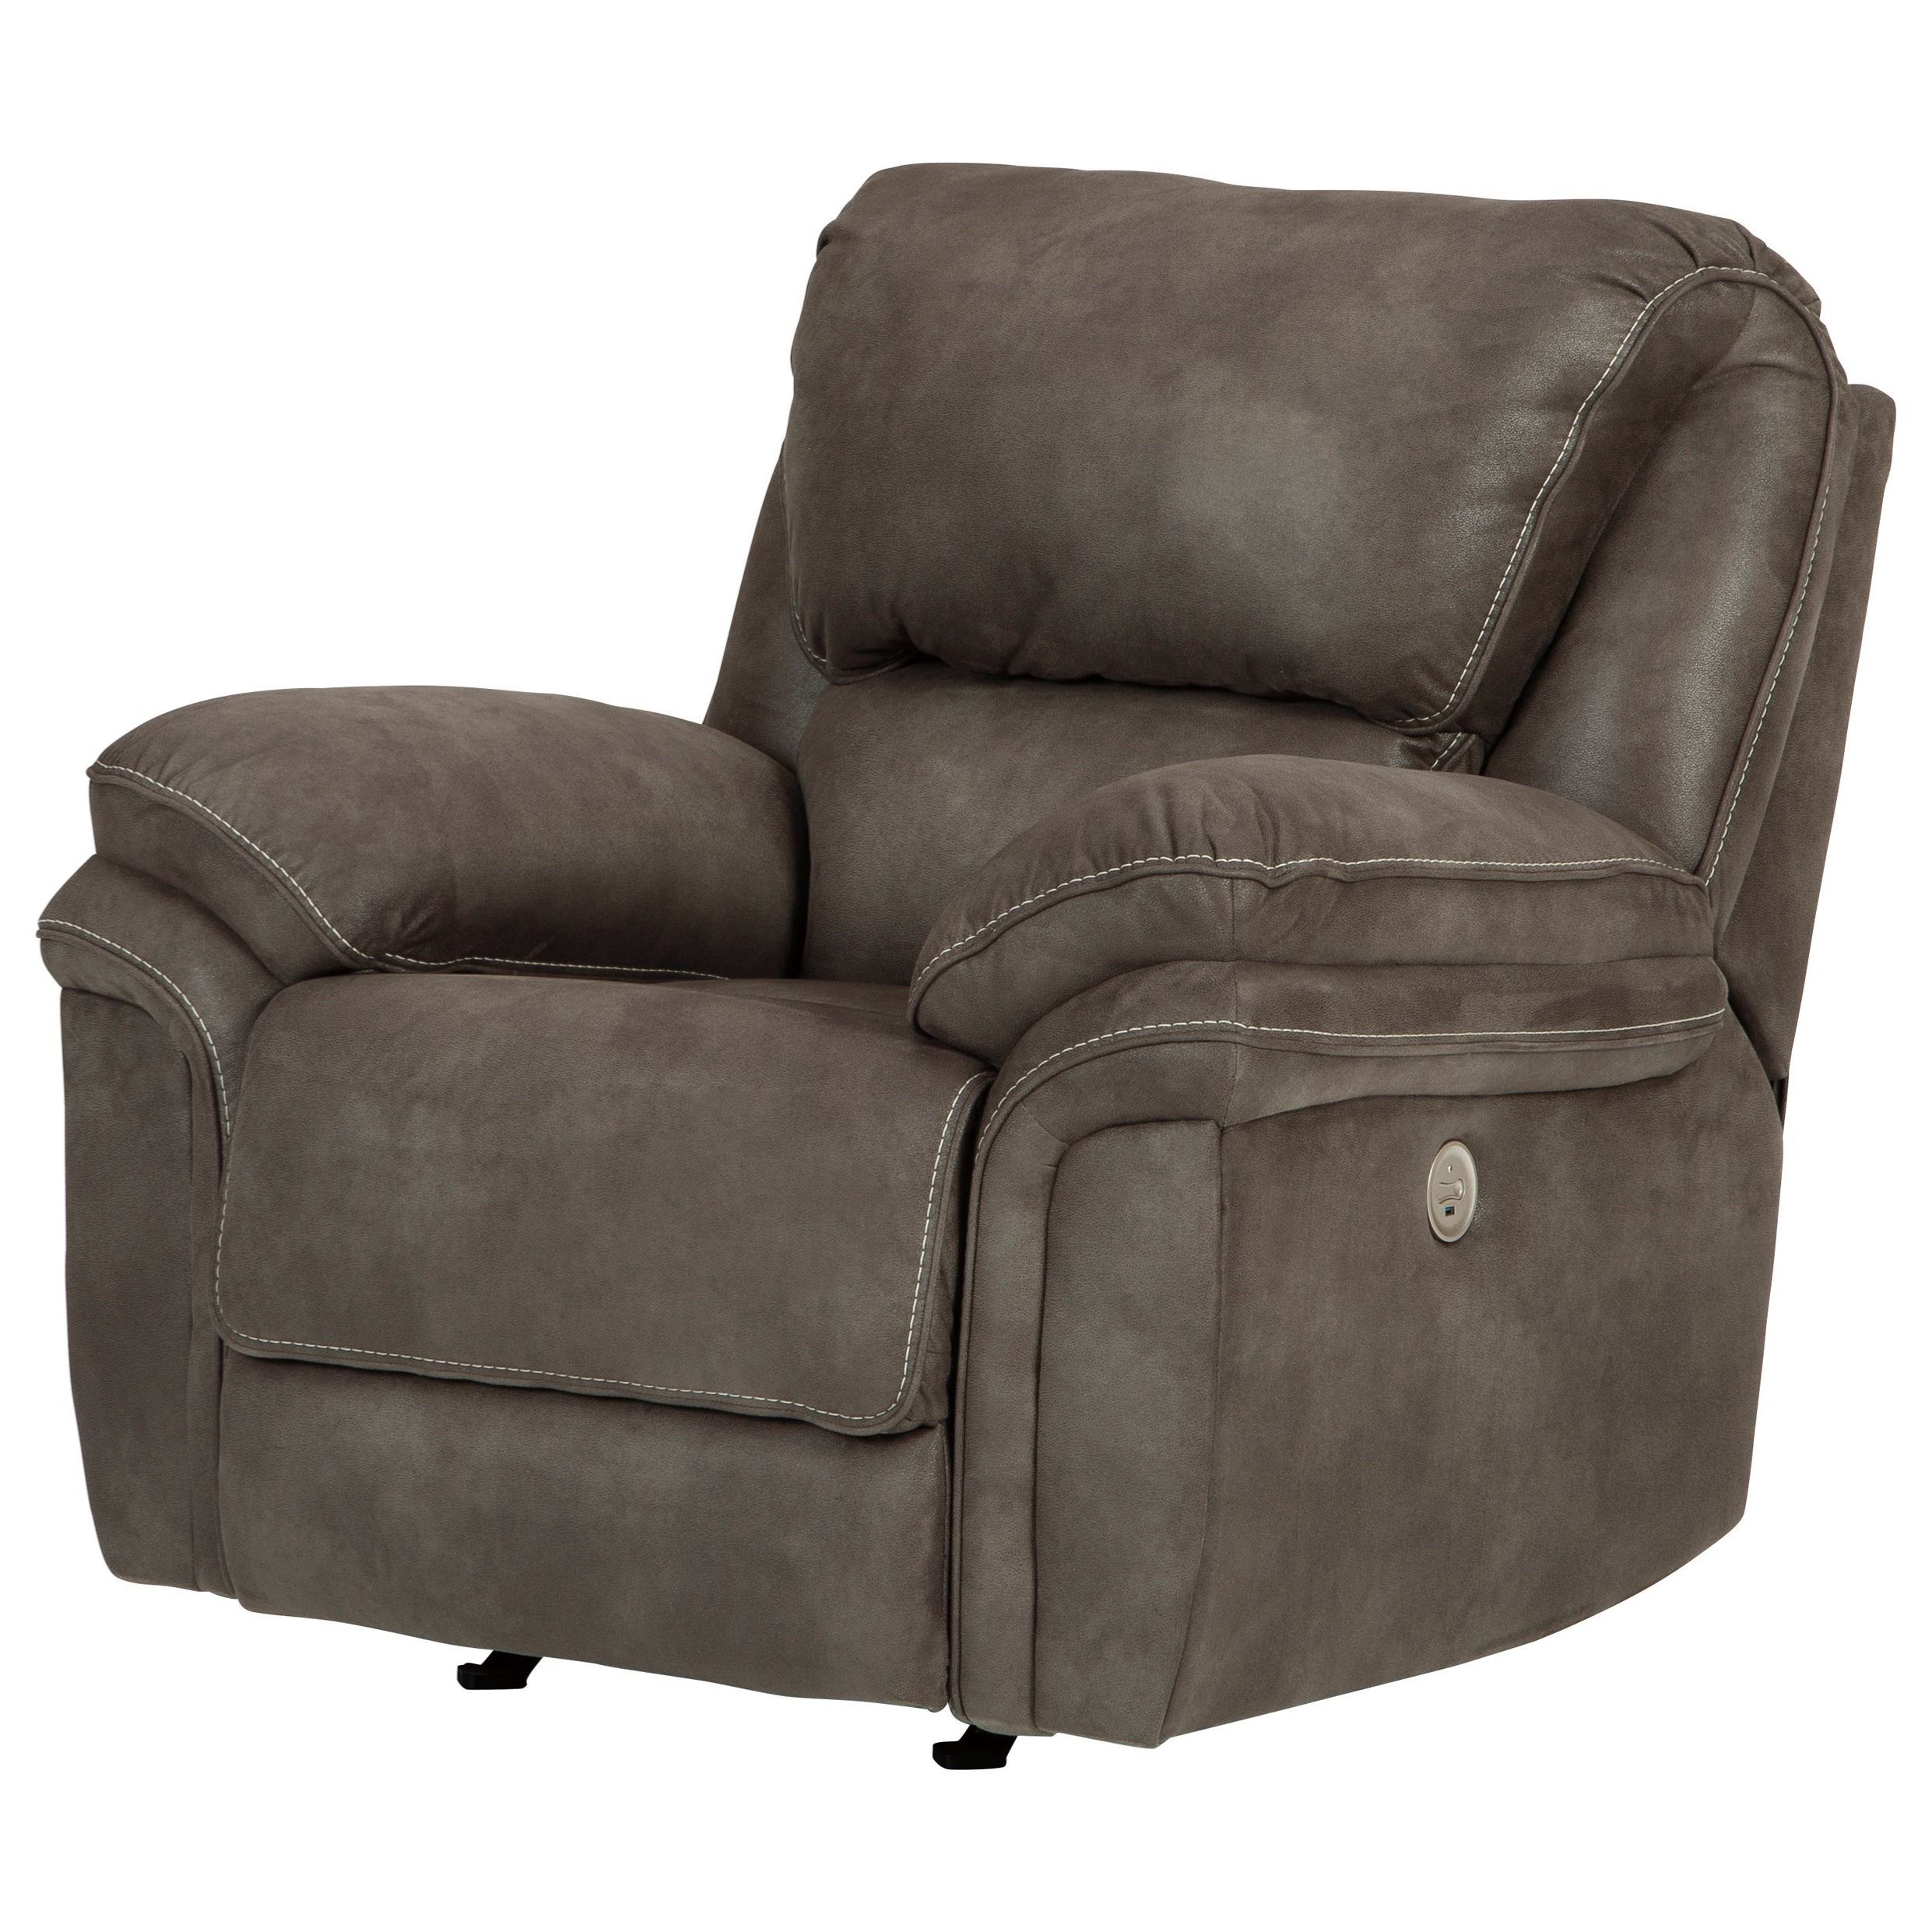 Benchcraft Trementon Faux Suede Power Rocker Recliner W/ Usb Charging Throughout Latest Faux Leather Ac And Usb Charging Ottomans (View 2 of 10)